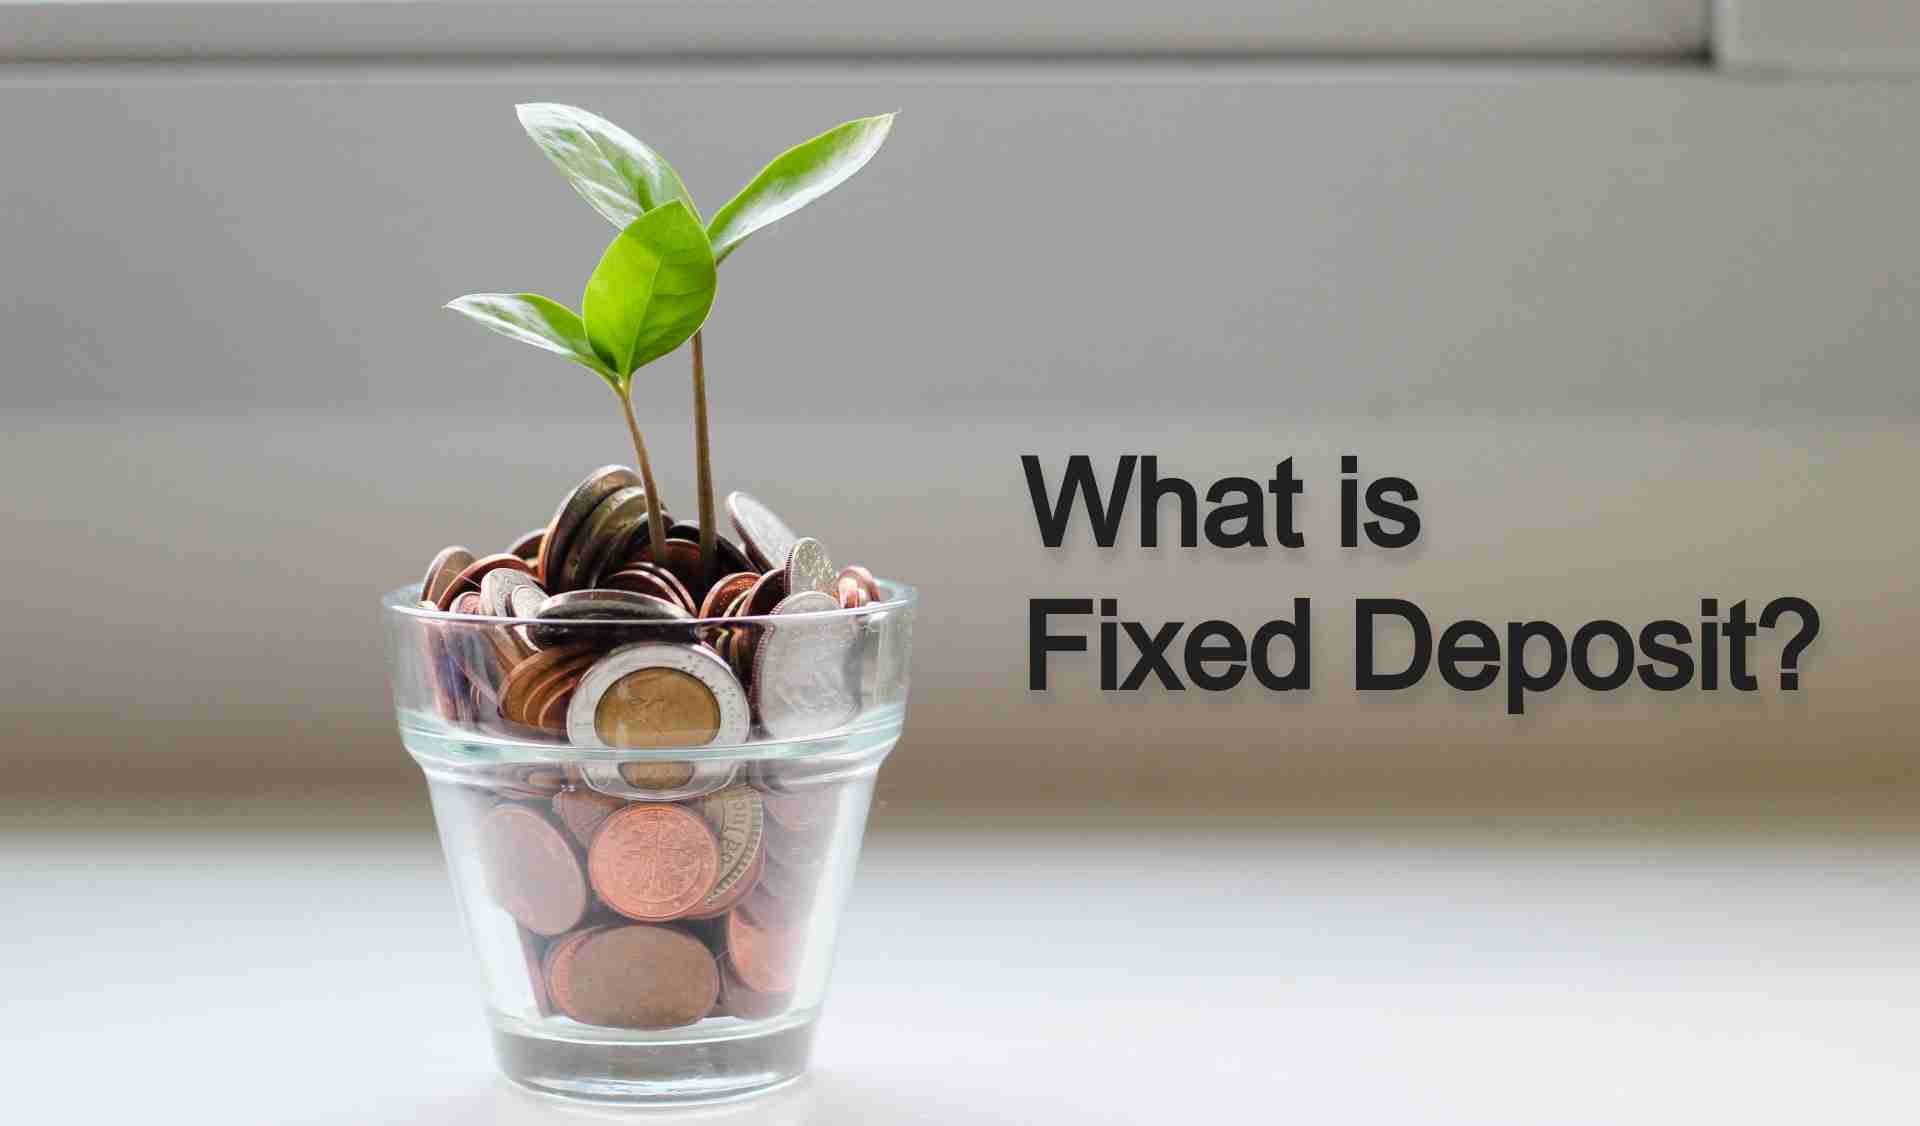 What is Fixed Deposit?